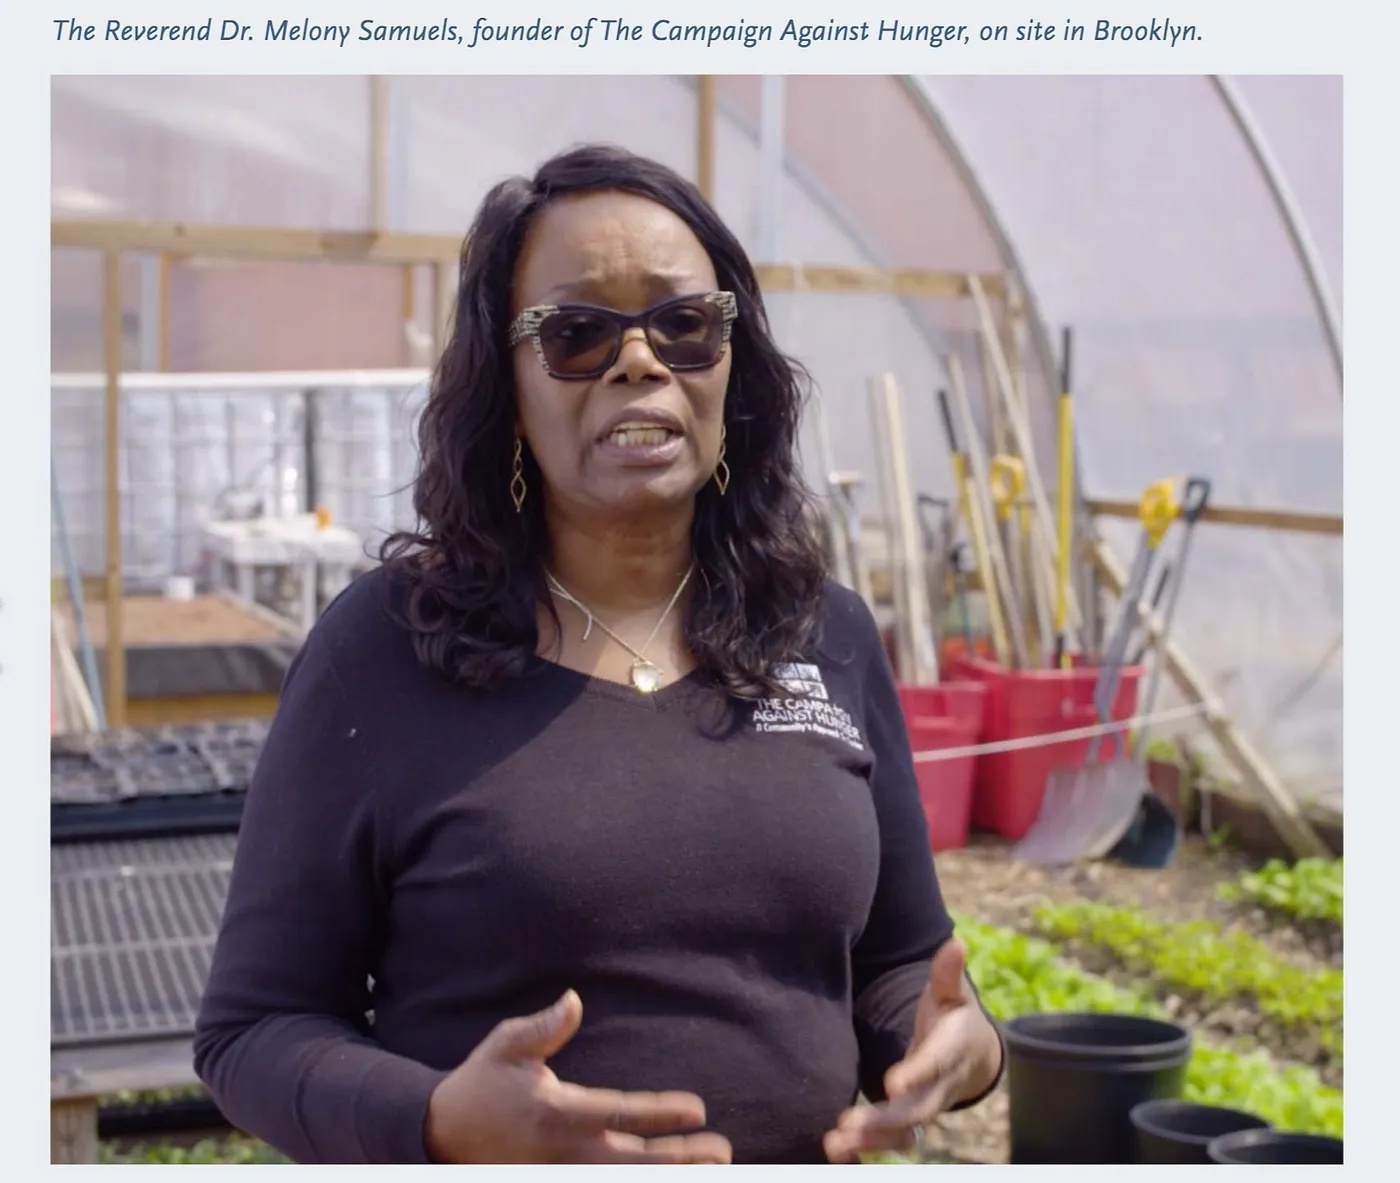 Reverend Dr. Melony Samuels, founder of The Campaign Against Hunger, on site in Brooklyn